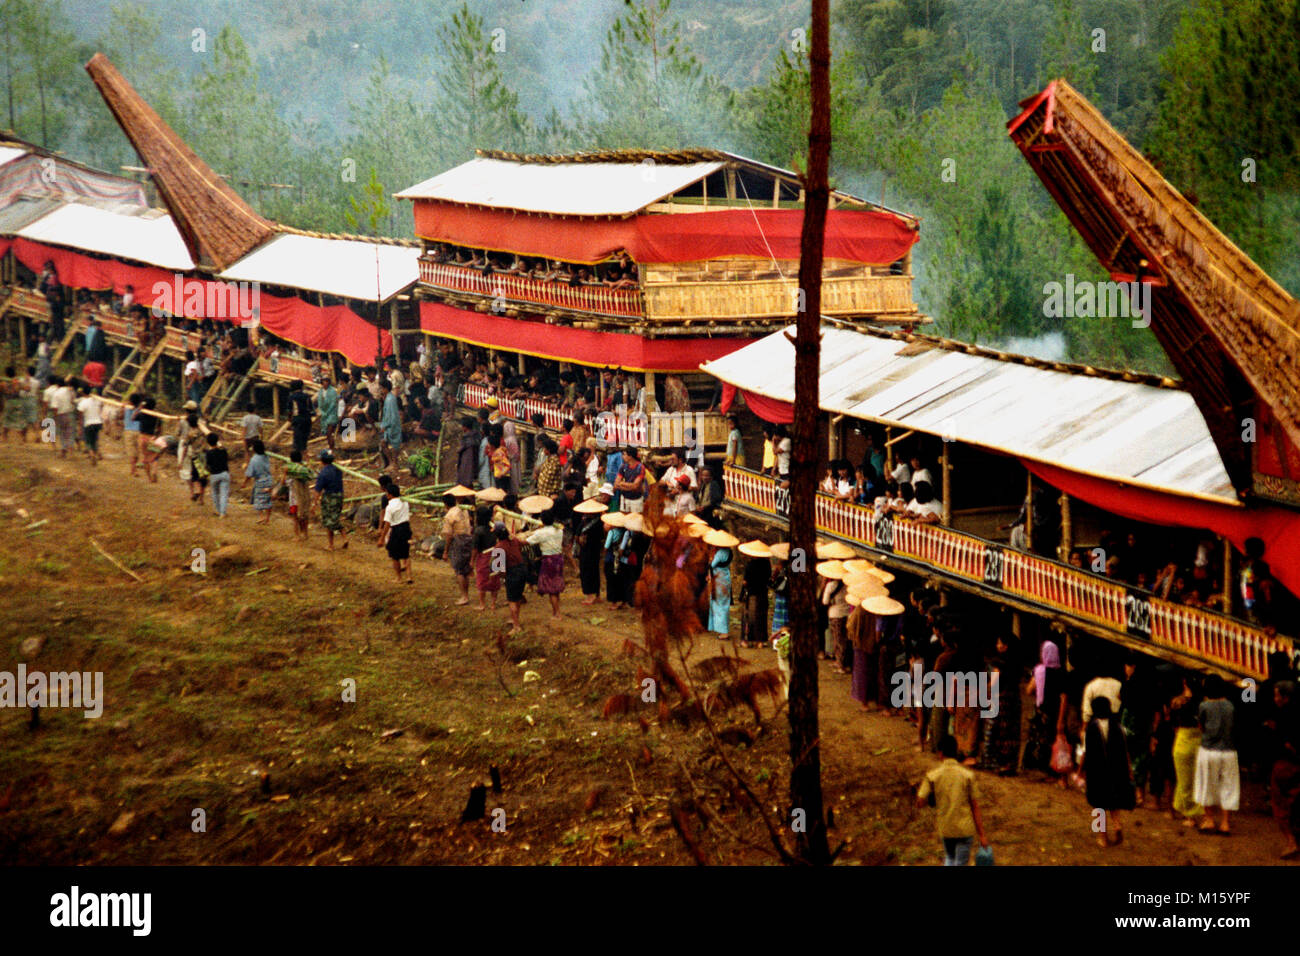 Amongst the Toraja people of South Sulawesi, Indonesia, a funeral is an rite of passage celebrated by thousands of people. 1988 archival image. Stock Photo